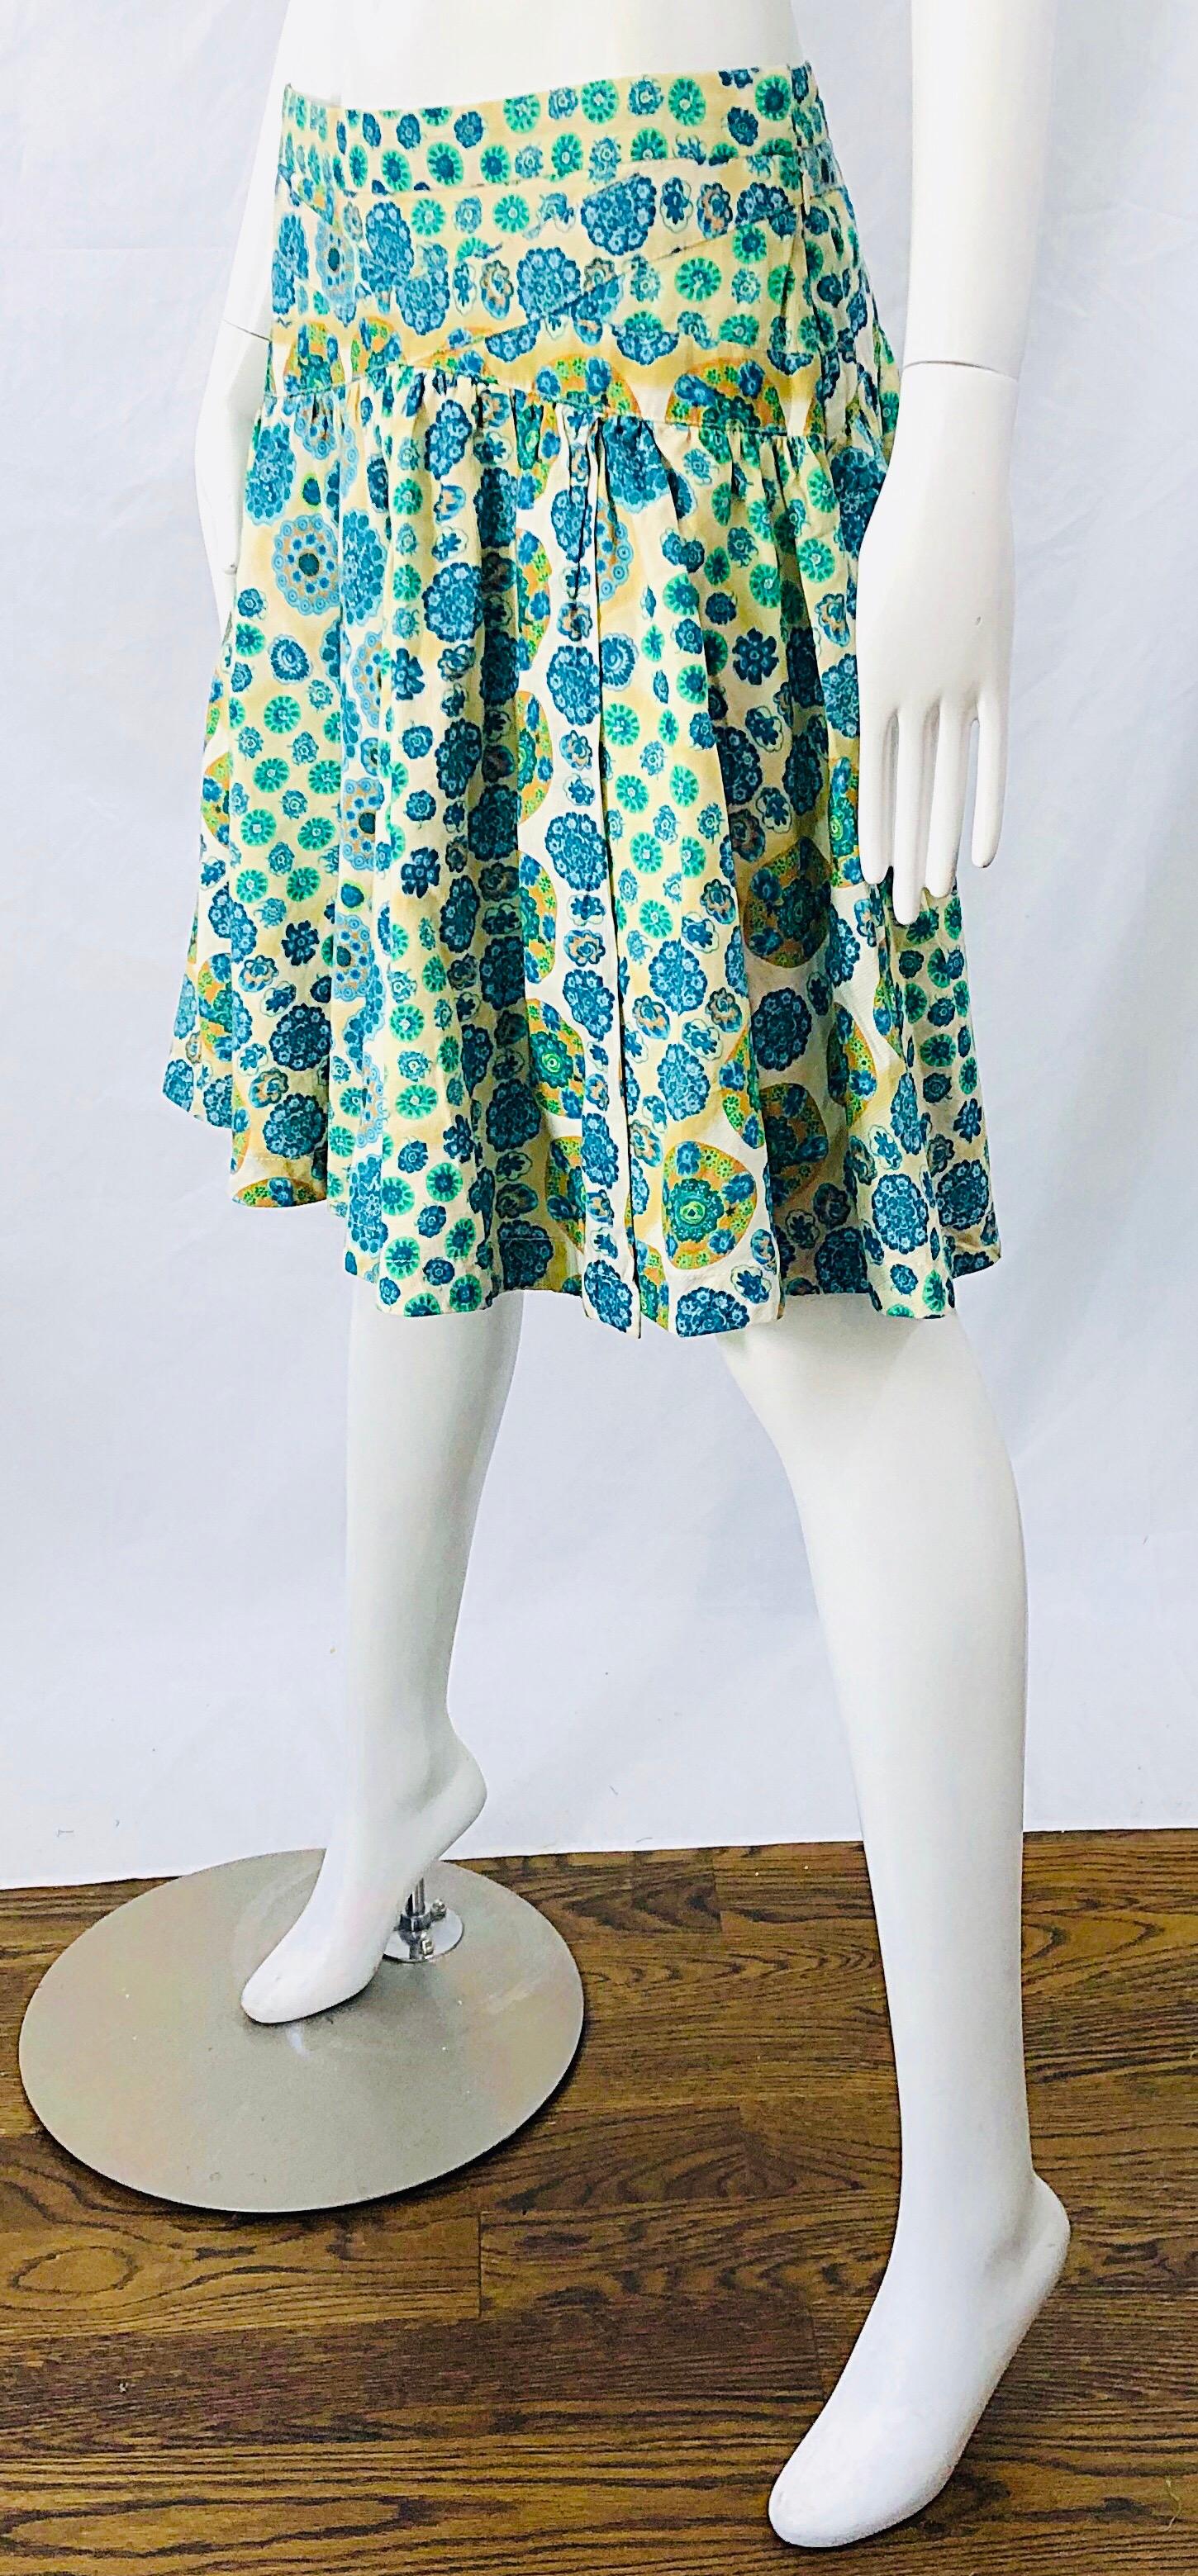 Marc Jacobs 2000s Blue Green Orange Cotton Low Rise Size 2 / 4 Skirt For Sale 3